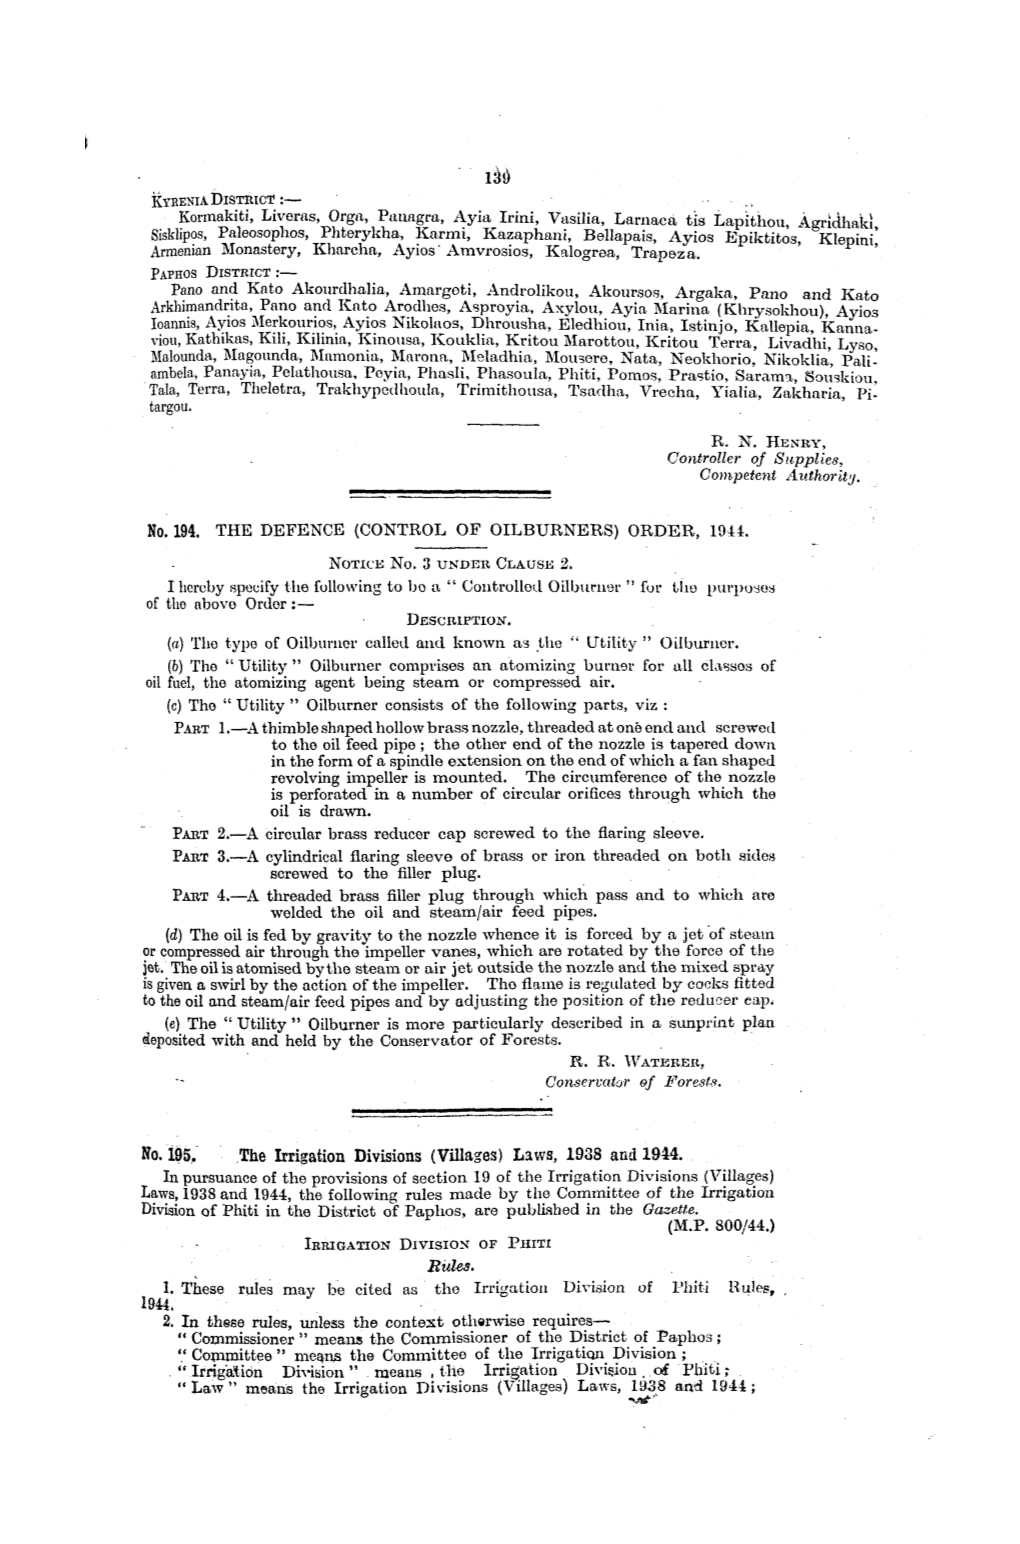 130 No. 195. the Irrigation Divisions (Villages) Laws, 1938 and 1944